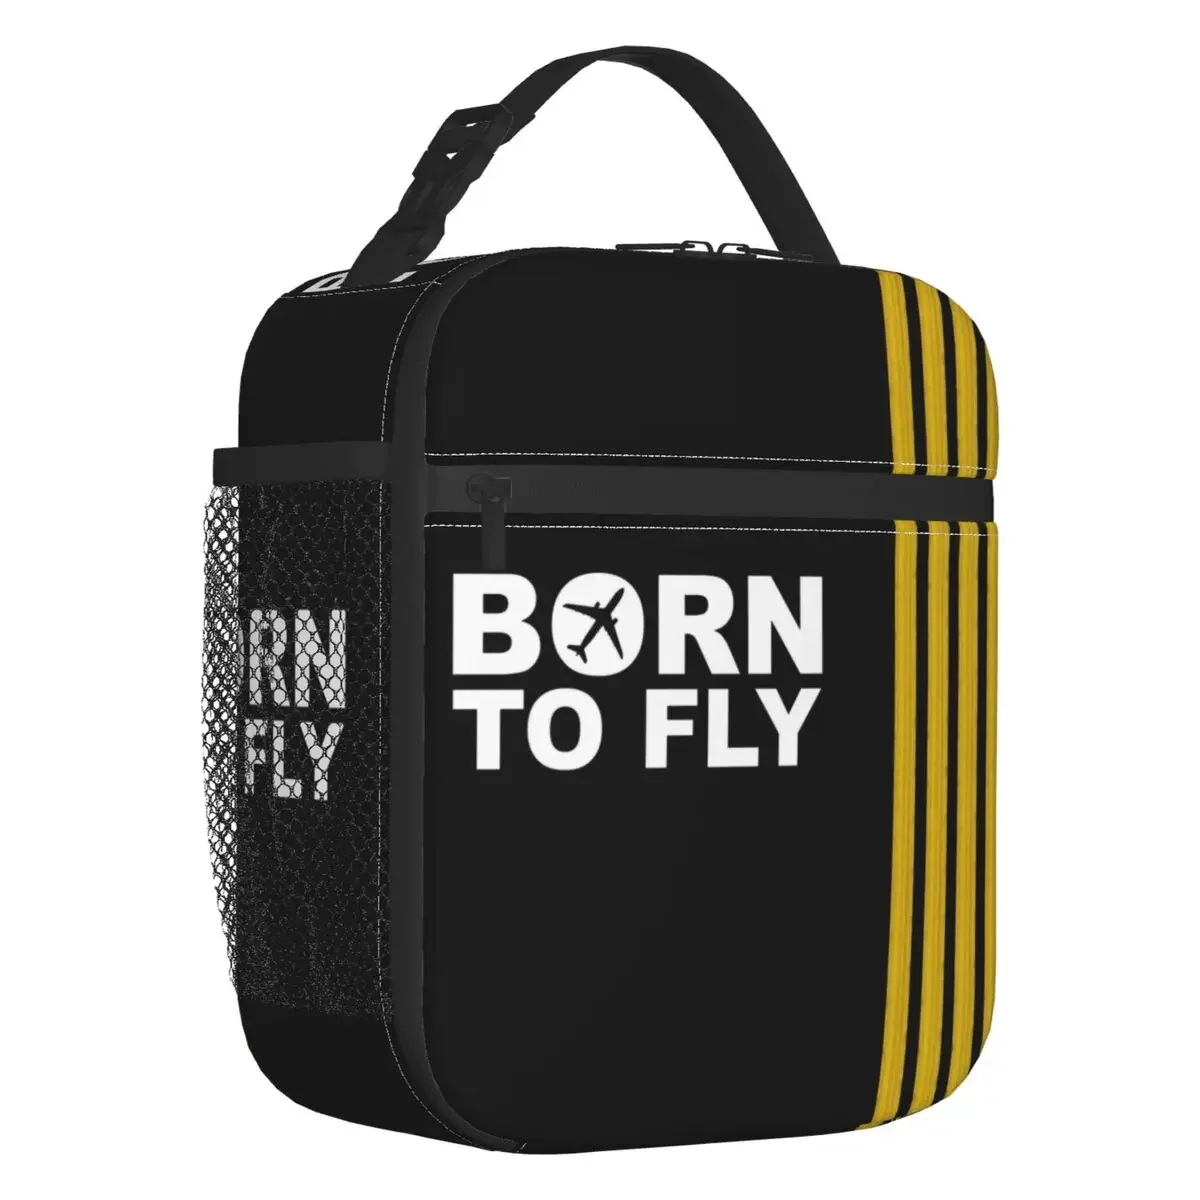 

Born To Fly Captain Stripes Flight Pilot Lunch Boxes Multifunction Aviation Airplane Cooler Thermal Food Insulated Lunch Bag